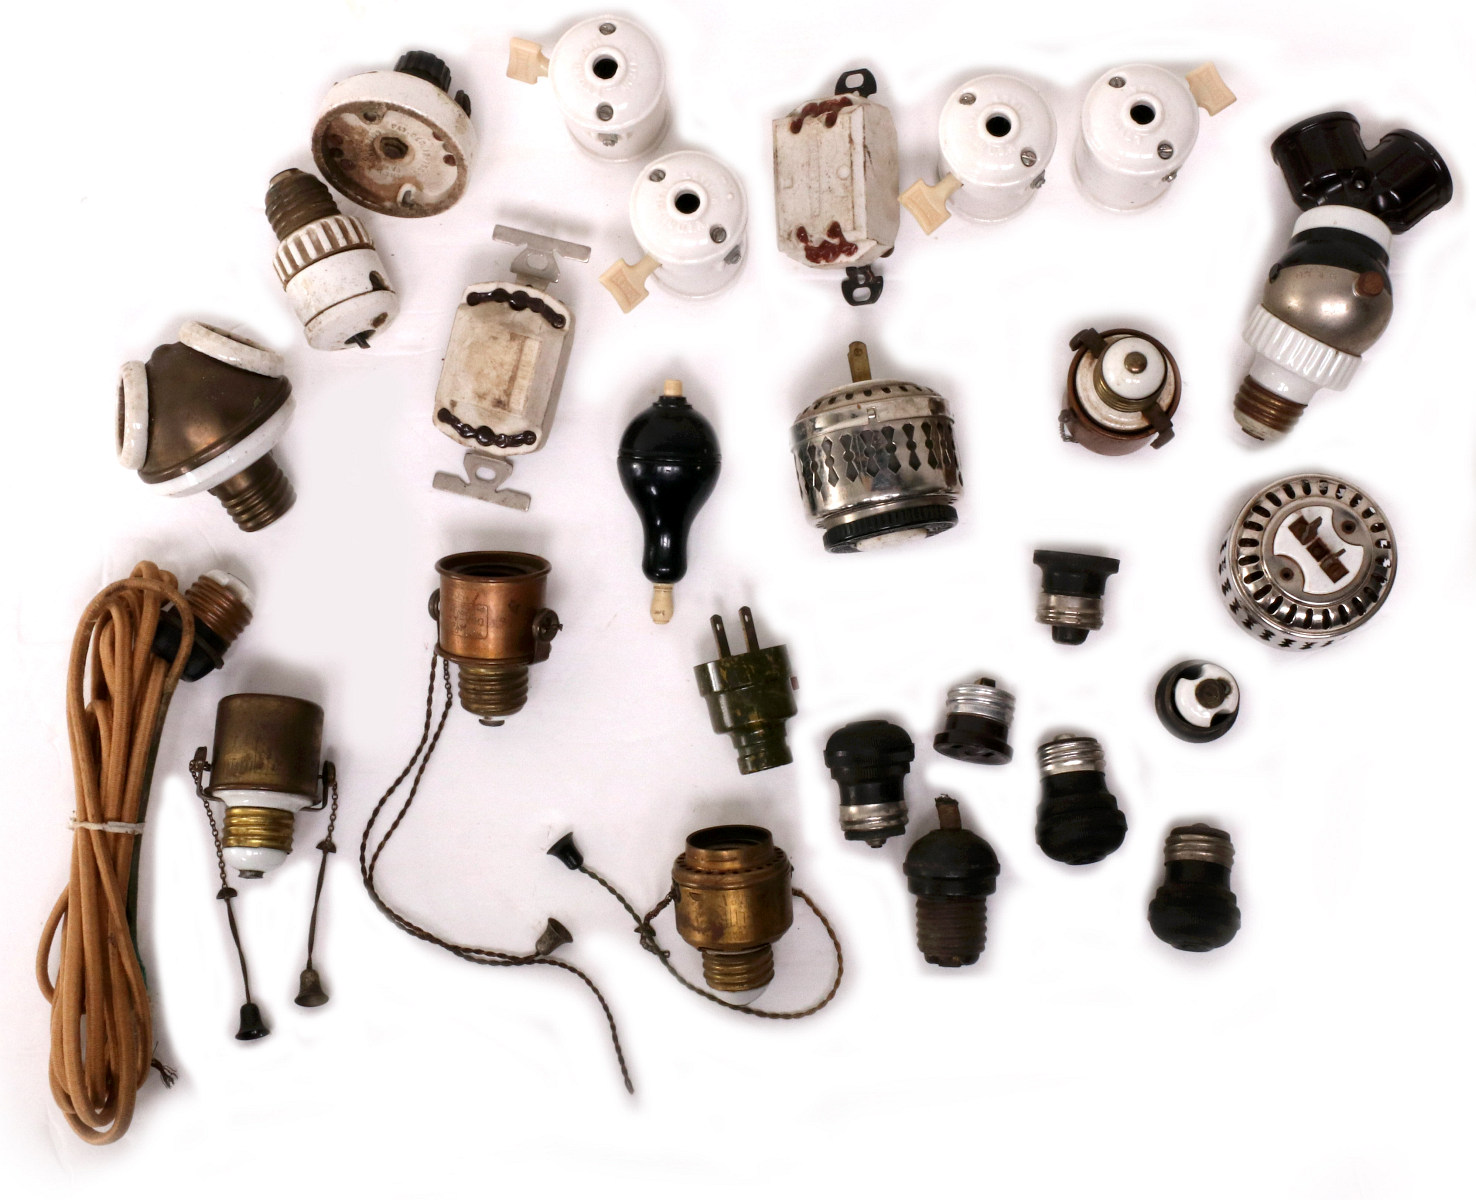 A LARGE LOT OF EARLY ELECTRICAL TECHNOLOGY ITEMS